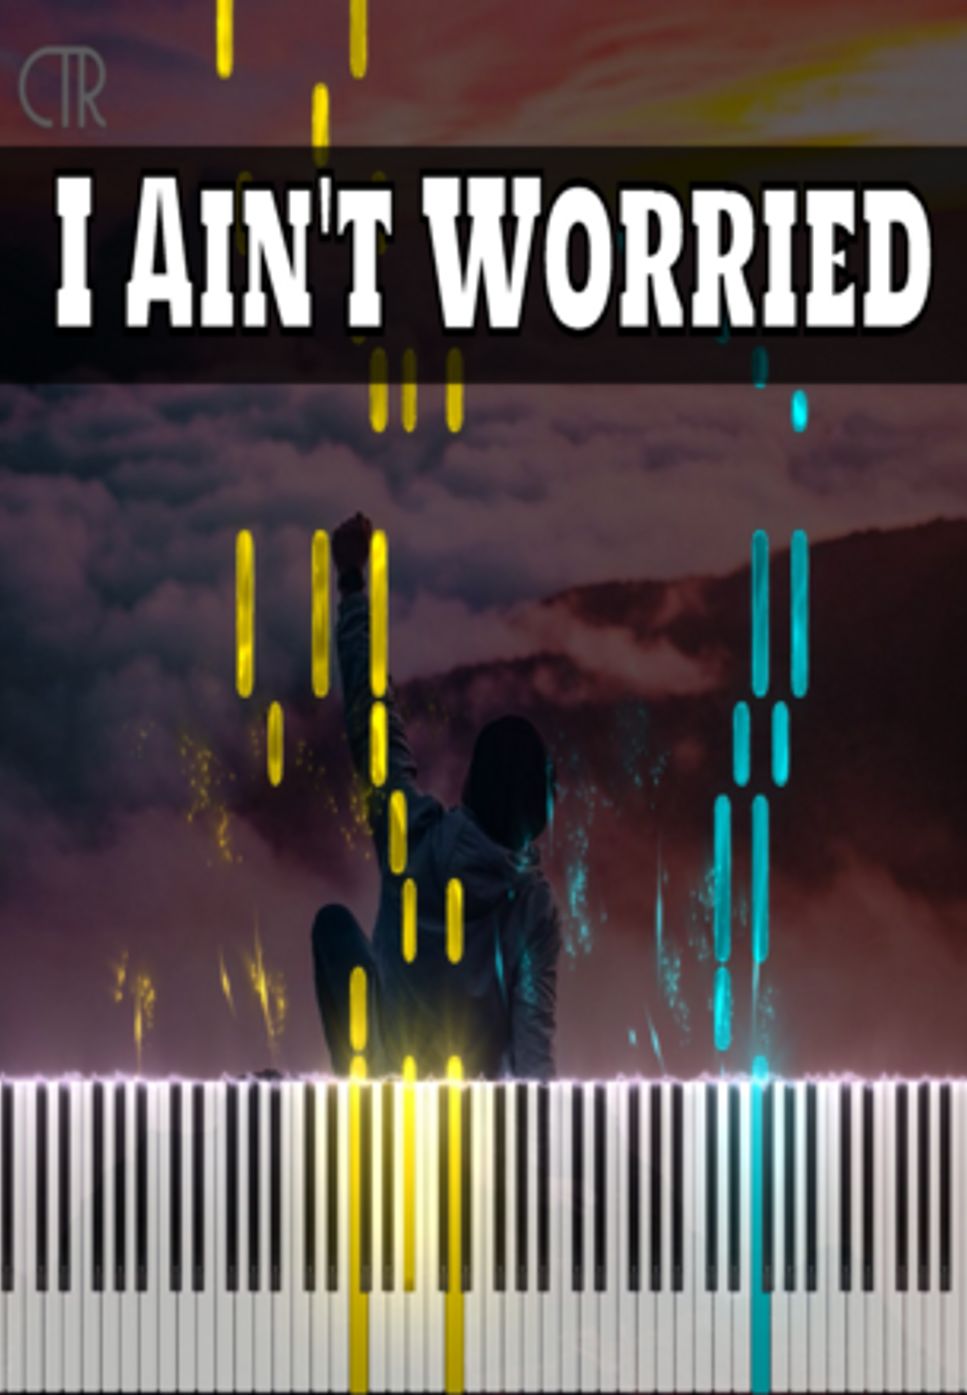 OneRepublic - I Ain't Worried by Vincent Payet